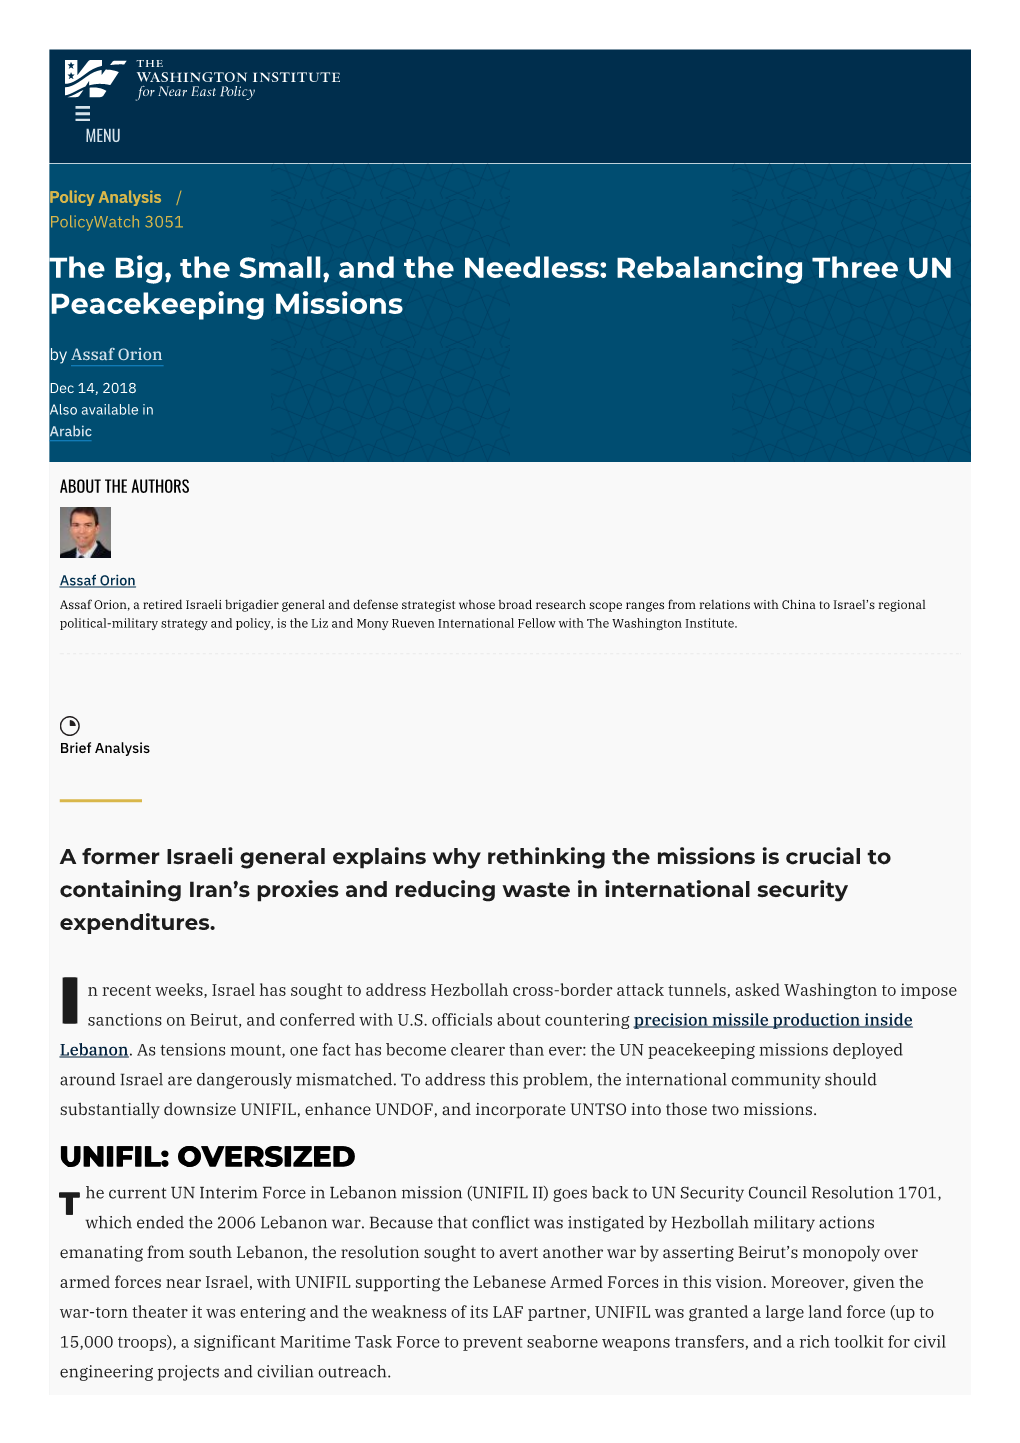 Rebalancing Three UN Peacekeeping Missions by Assaf Orion